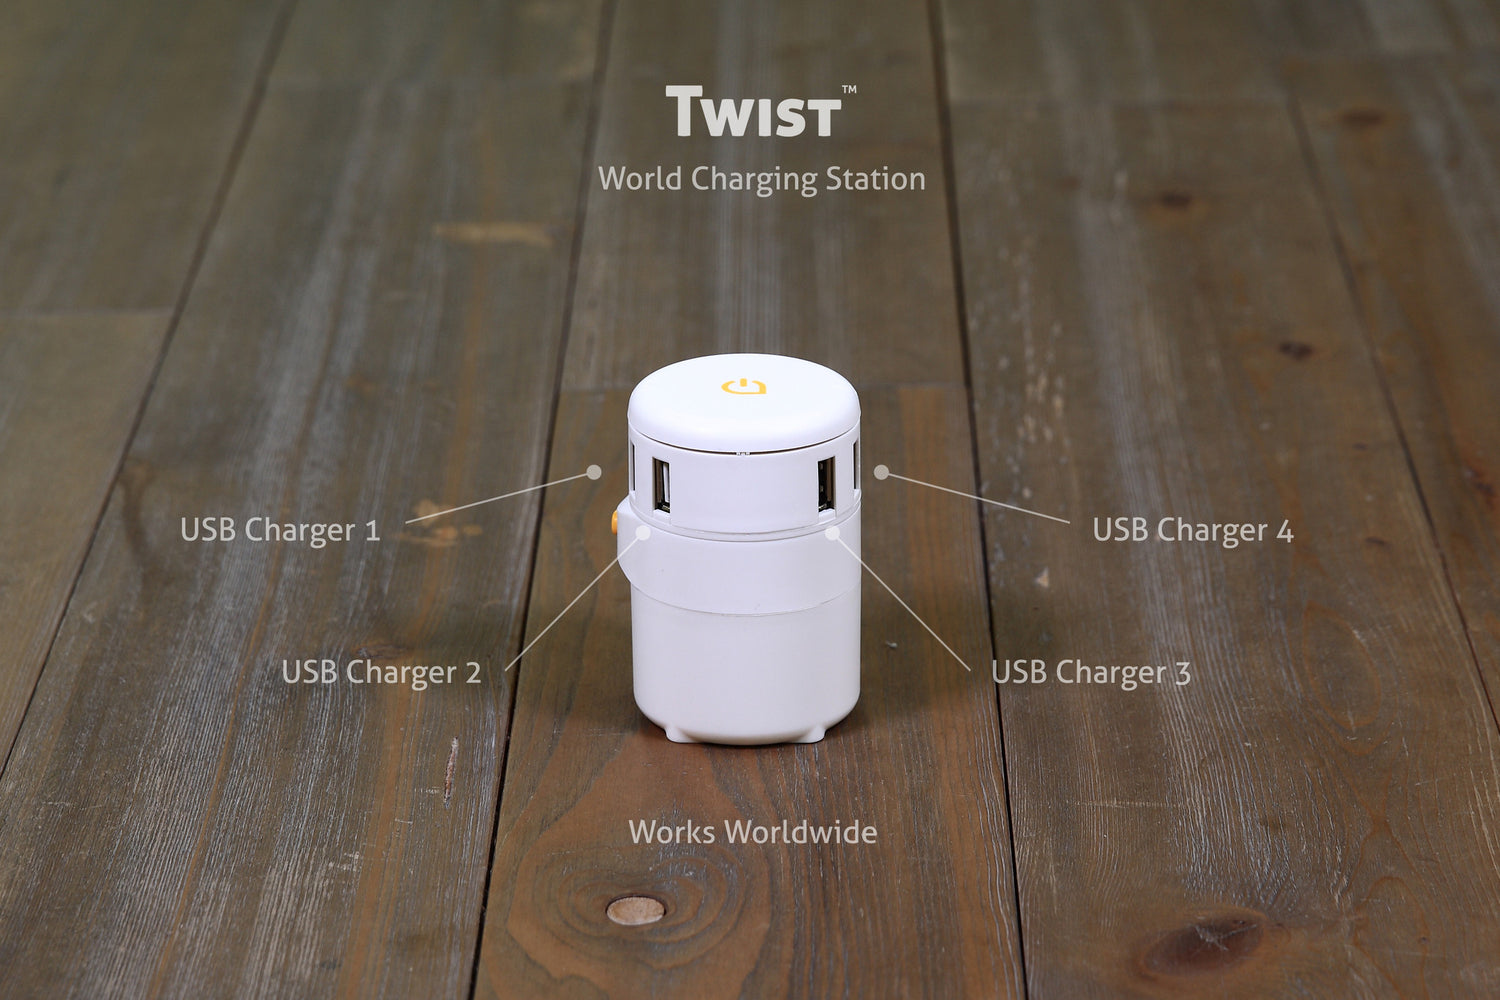 The Old Gang Meets TWIST World Charging Station